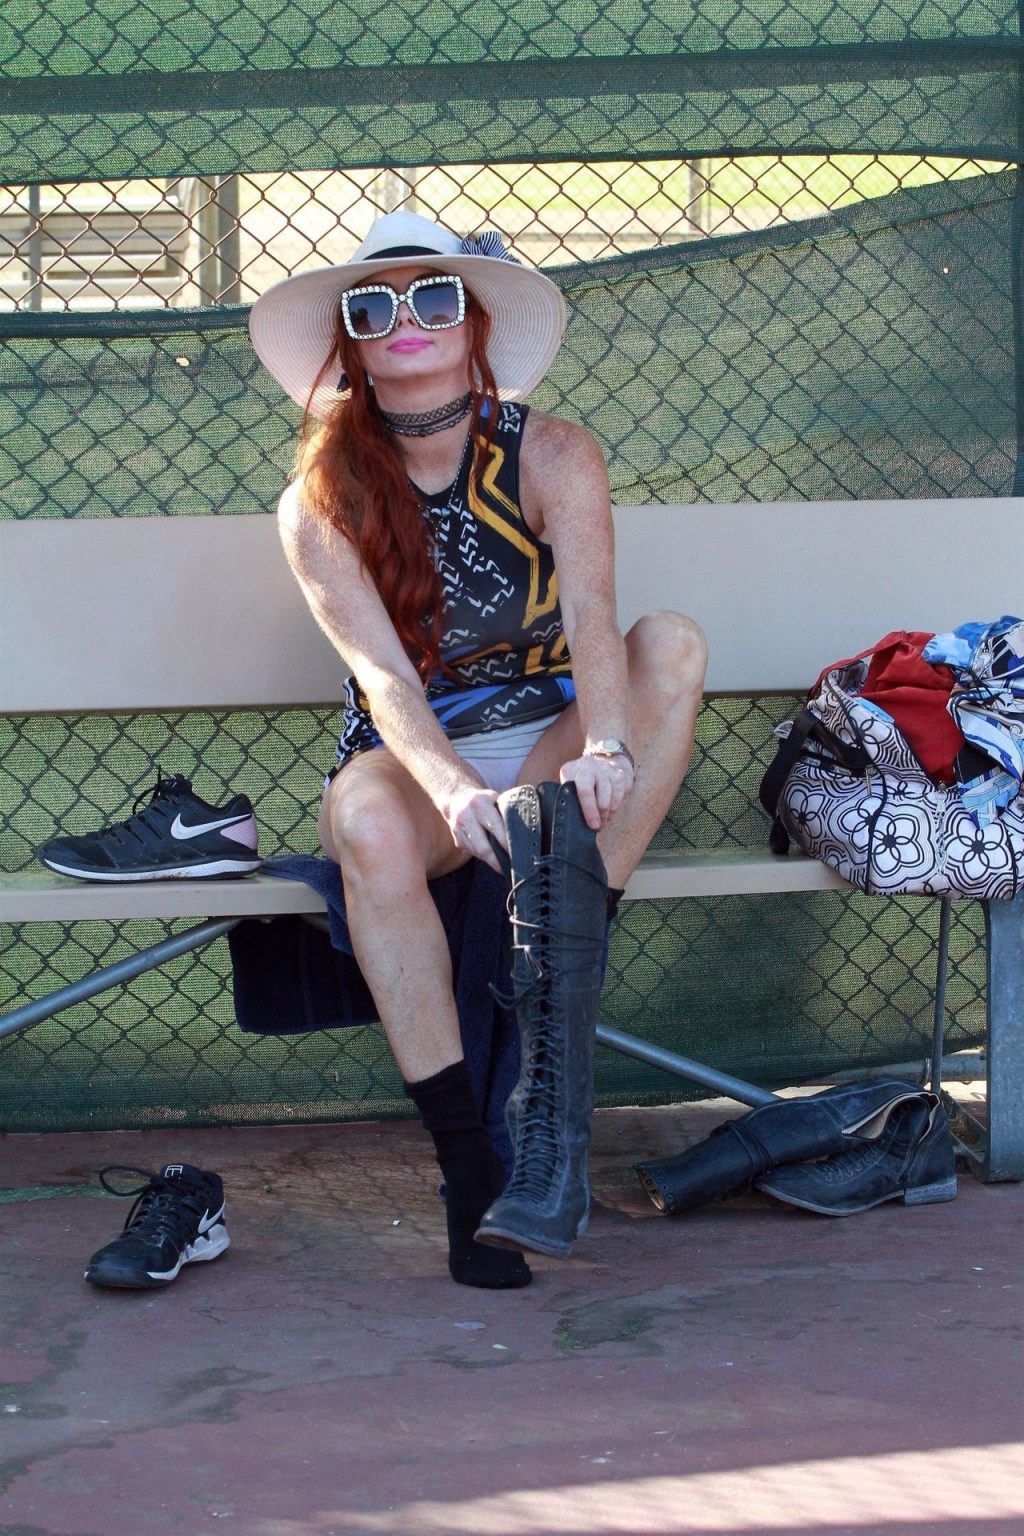 Phoebe Price Shows Off Some Upskirt and Tennis Moves (32 Photos)